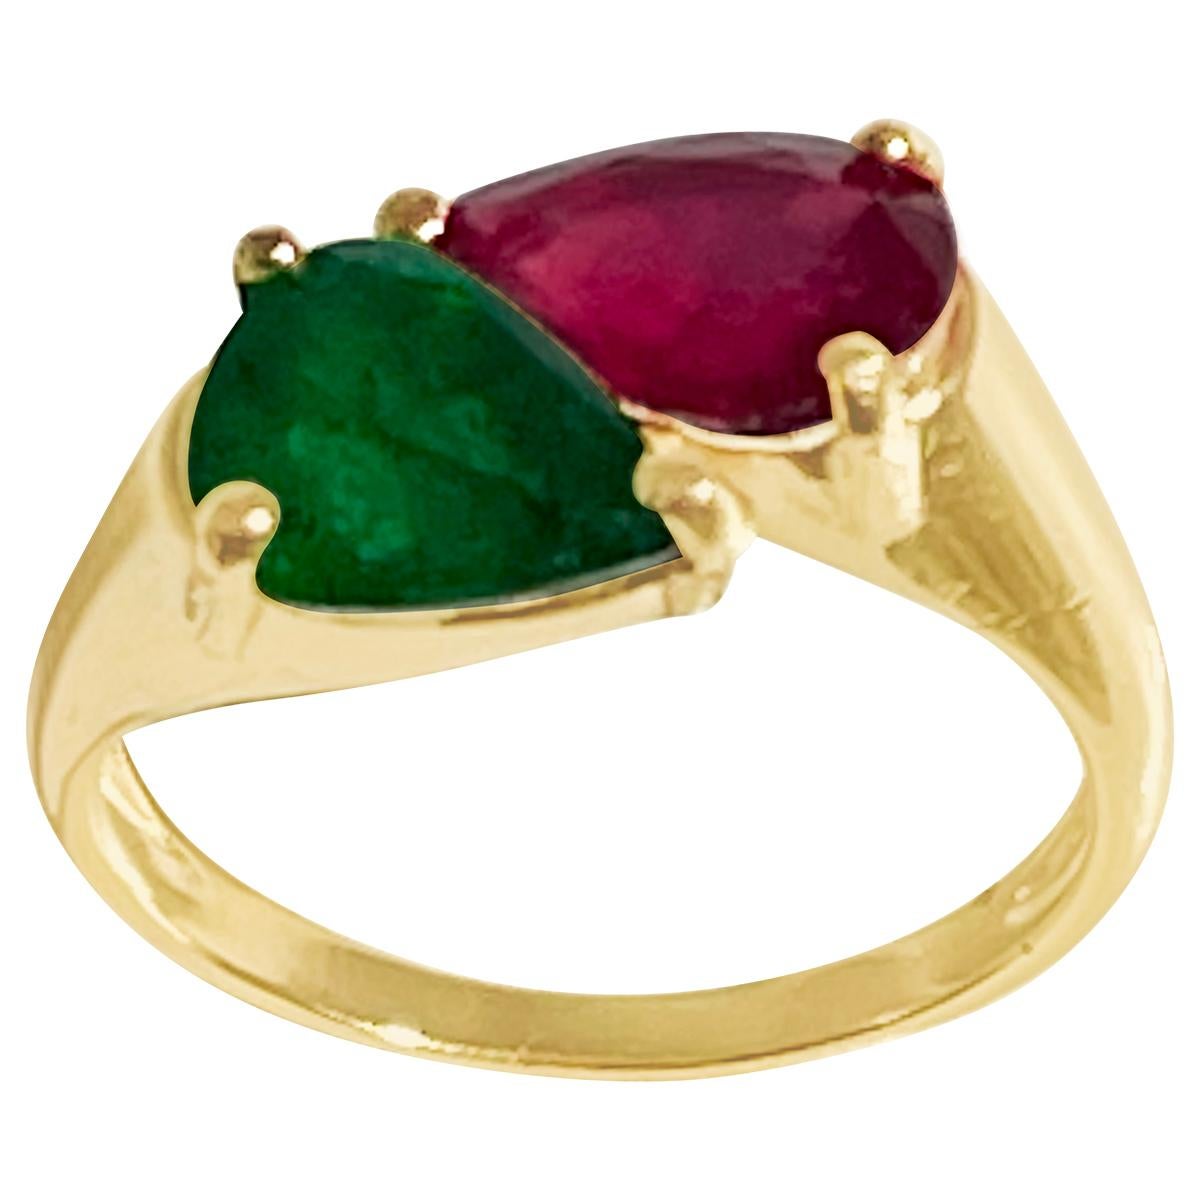 Two stone  Natural 2 Ct Emerald  and 2 Ct Treated  Ruby Engagement Ring in 14 Karat Gold Size 7
Approximately 2  Ct of pear shape   Emerald  and approximately 2 ct of treated ruby
 Two Stones  weighing approximately 4 ct total

14 Karat yellow Gold